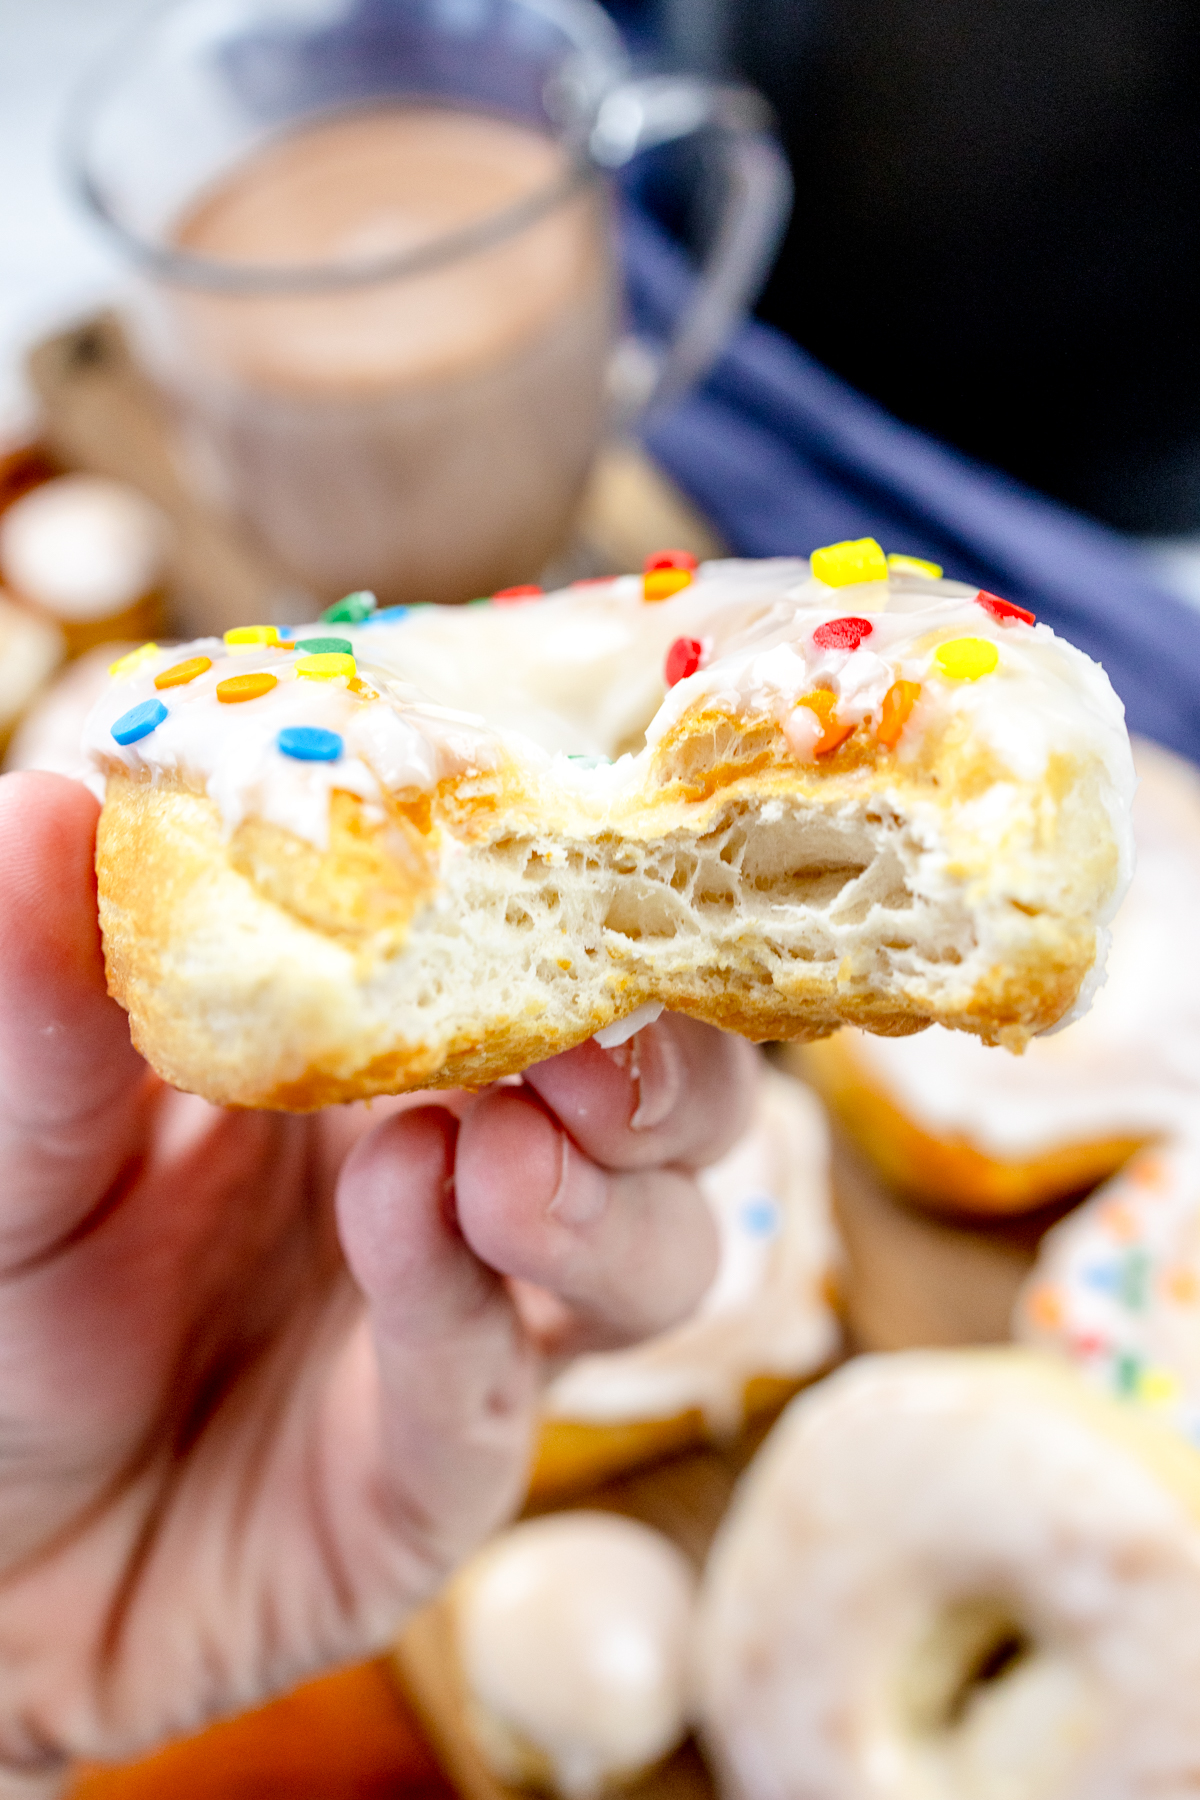 Close view of an iced and decorated biscuit donut with a bite taken from it to reveal the inside.